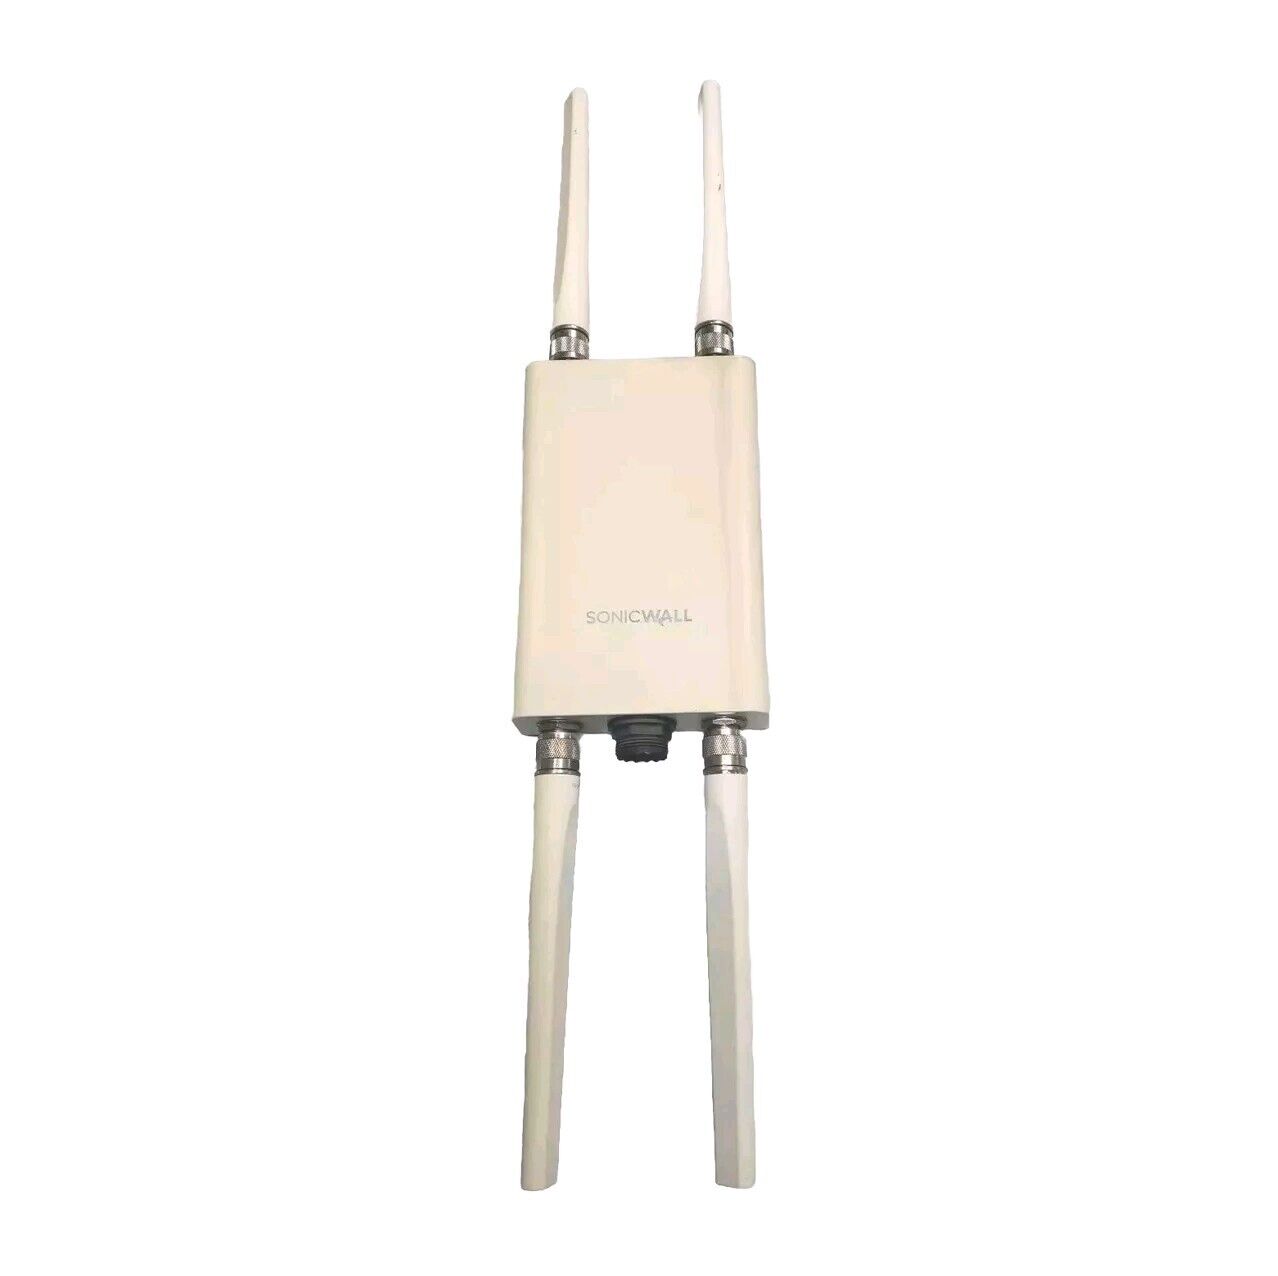 SonicWall SonicWave 231o *APL46-0D1* Outdoor Wireless Access Point